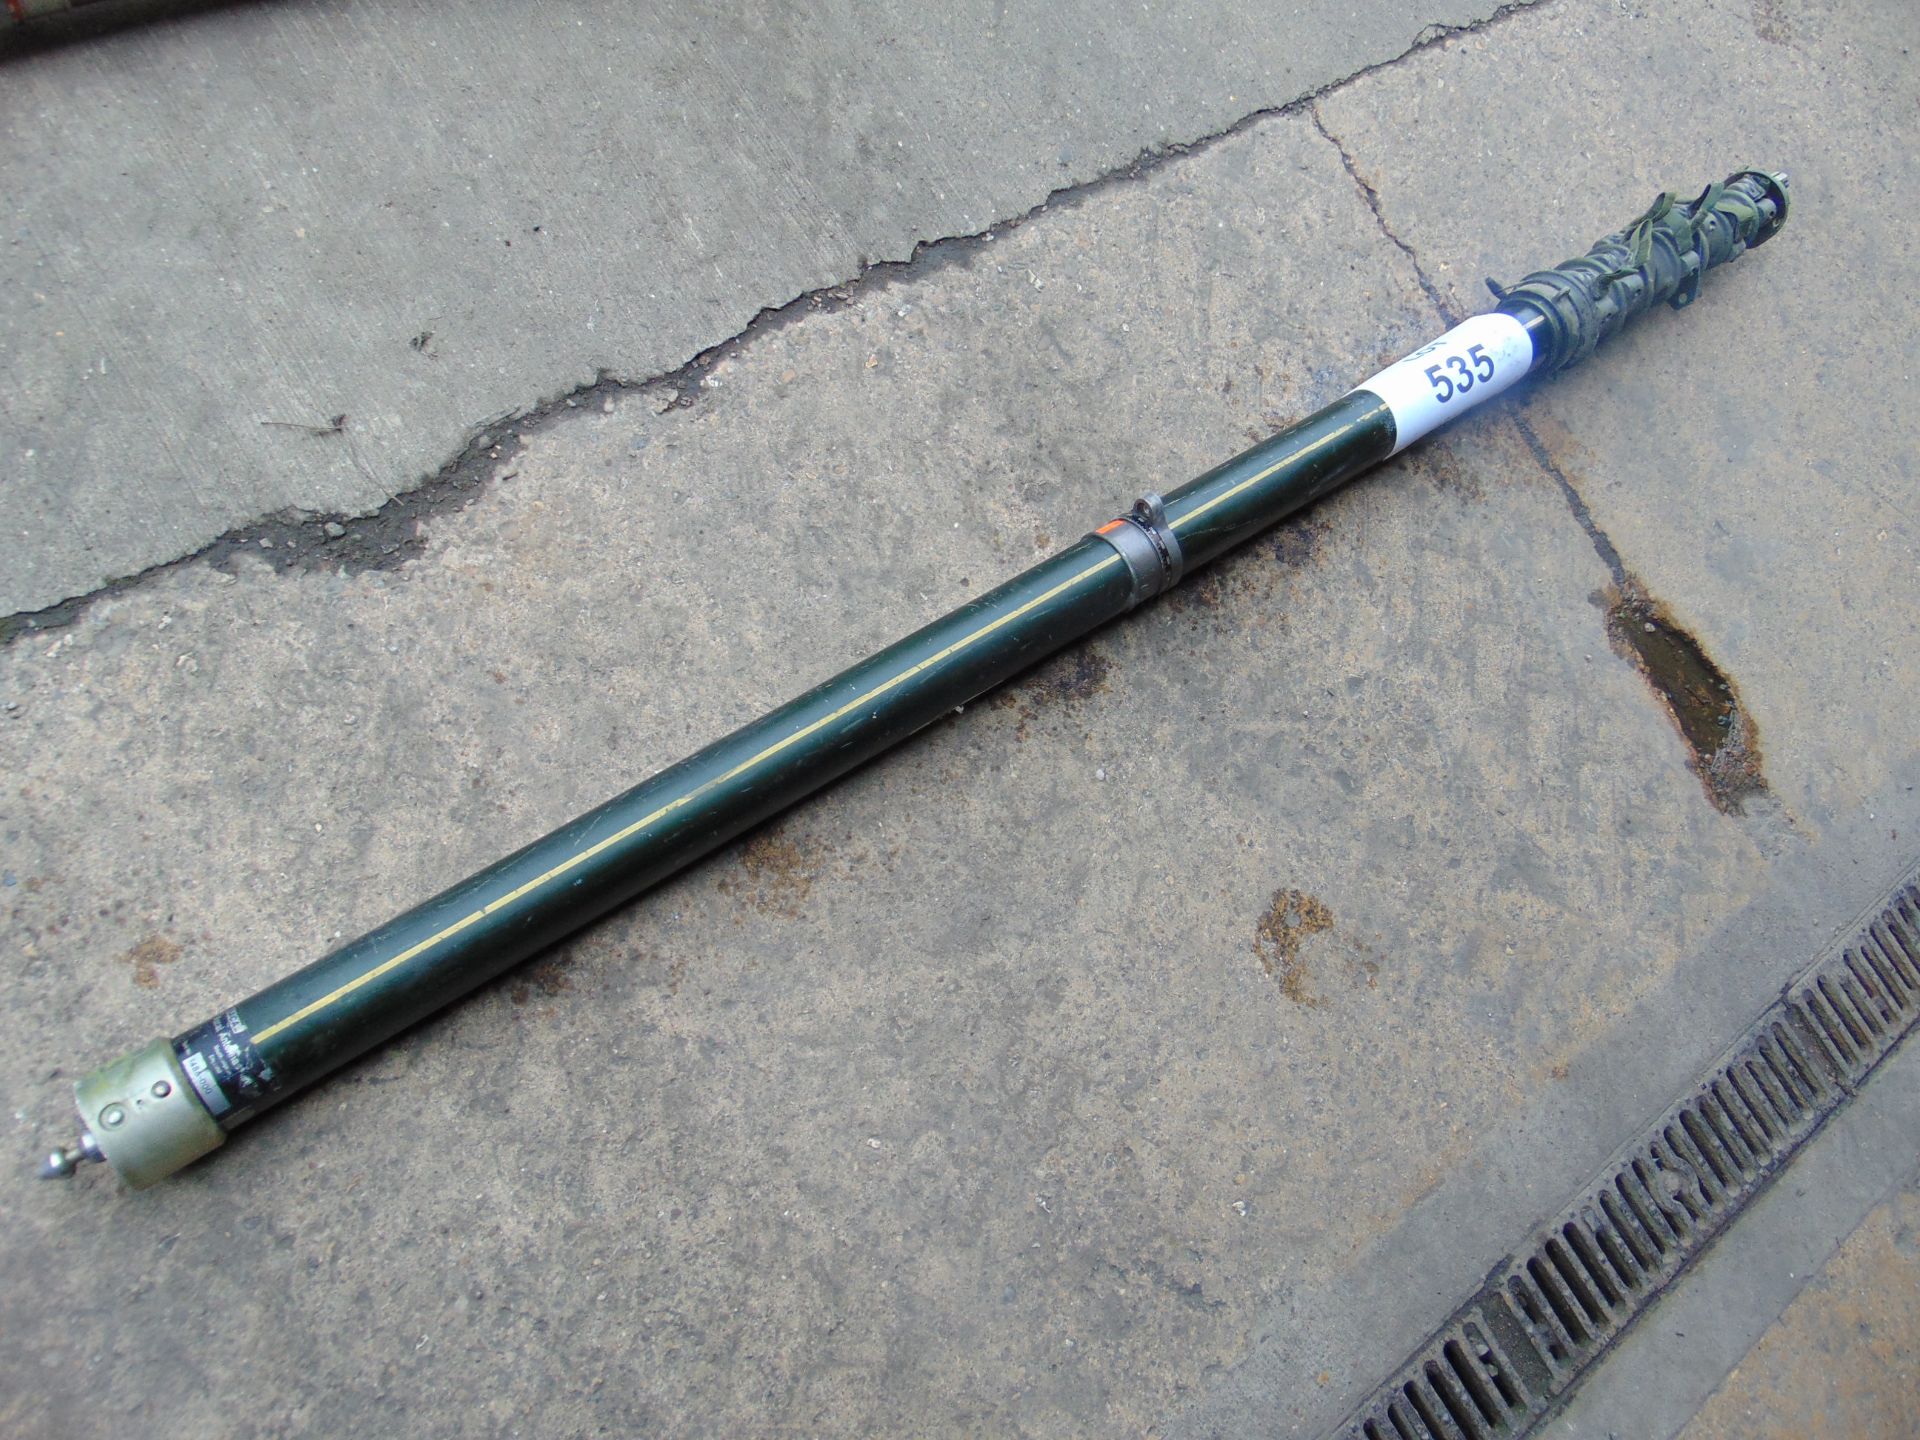 RACAL ANTENNA MAST USUALLY FITTED TO LANDROVER FFR VEHICLES - Image 4 of 4